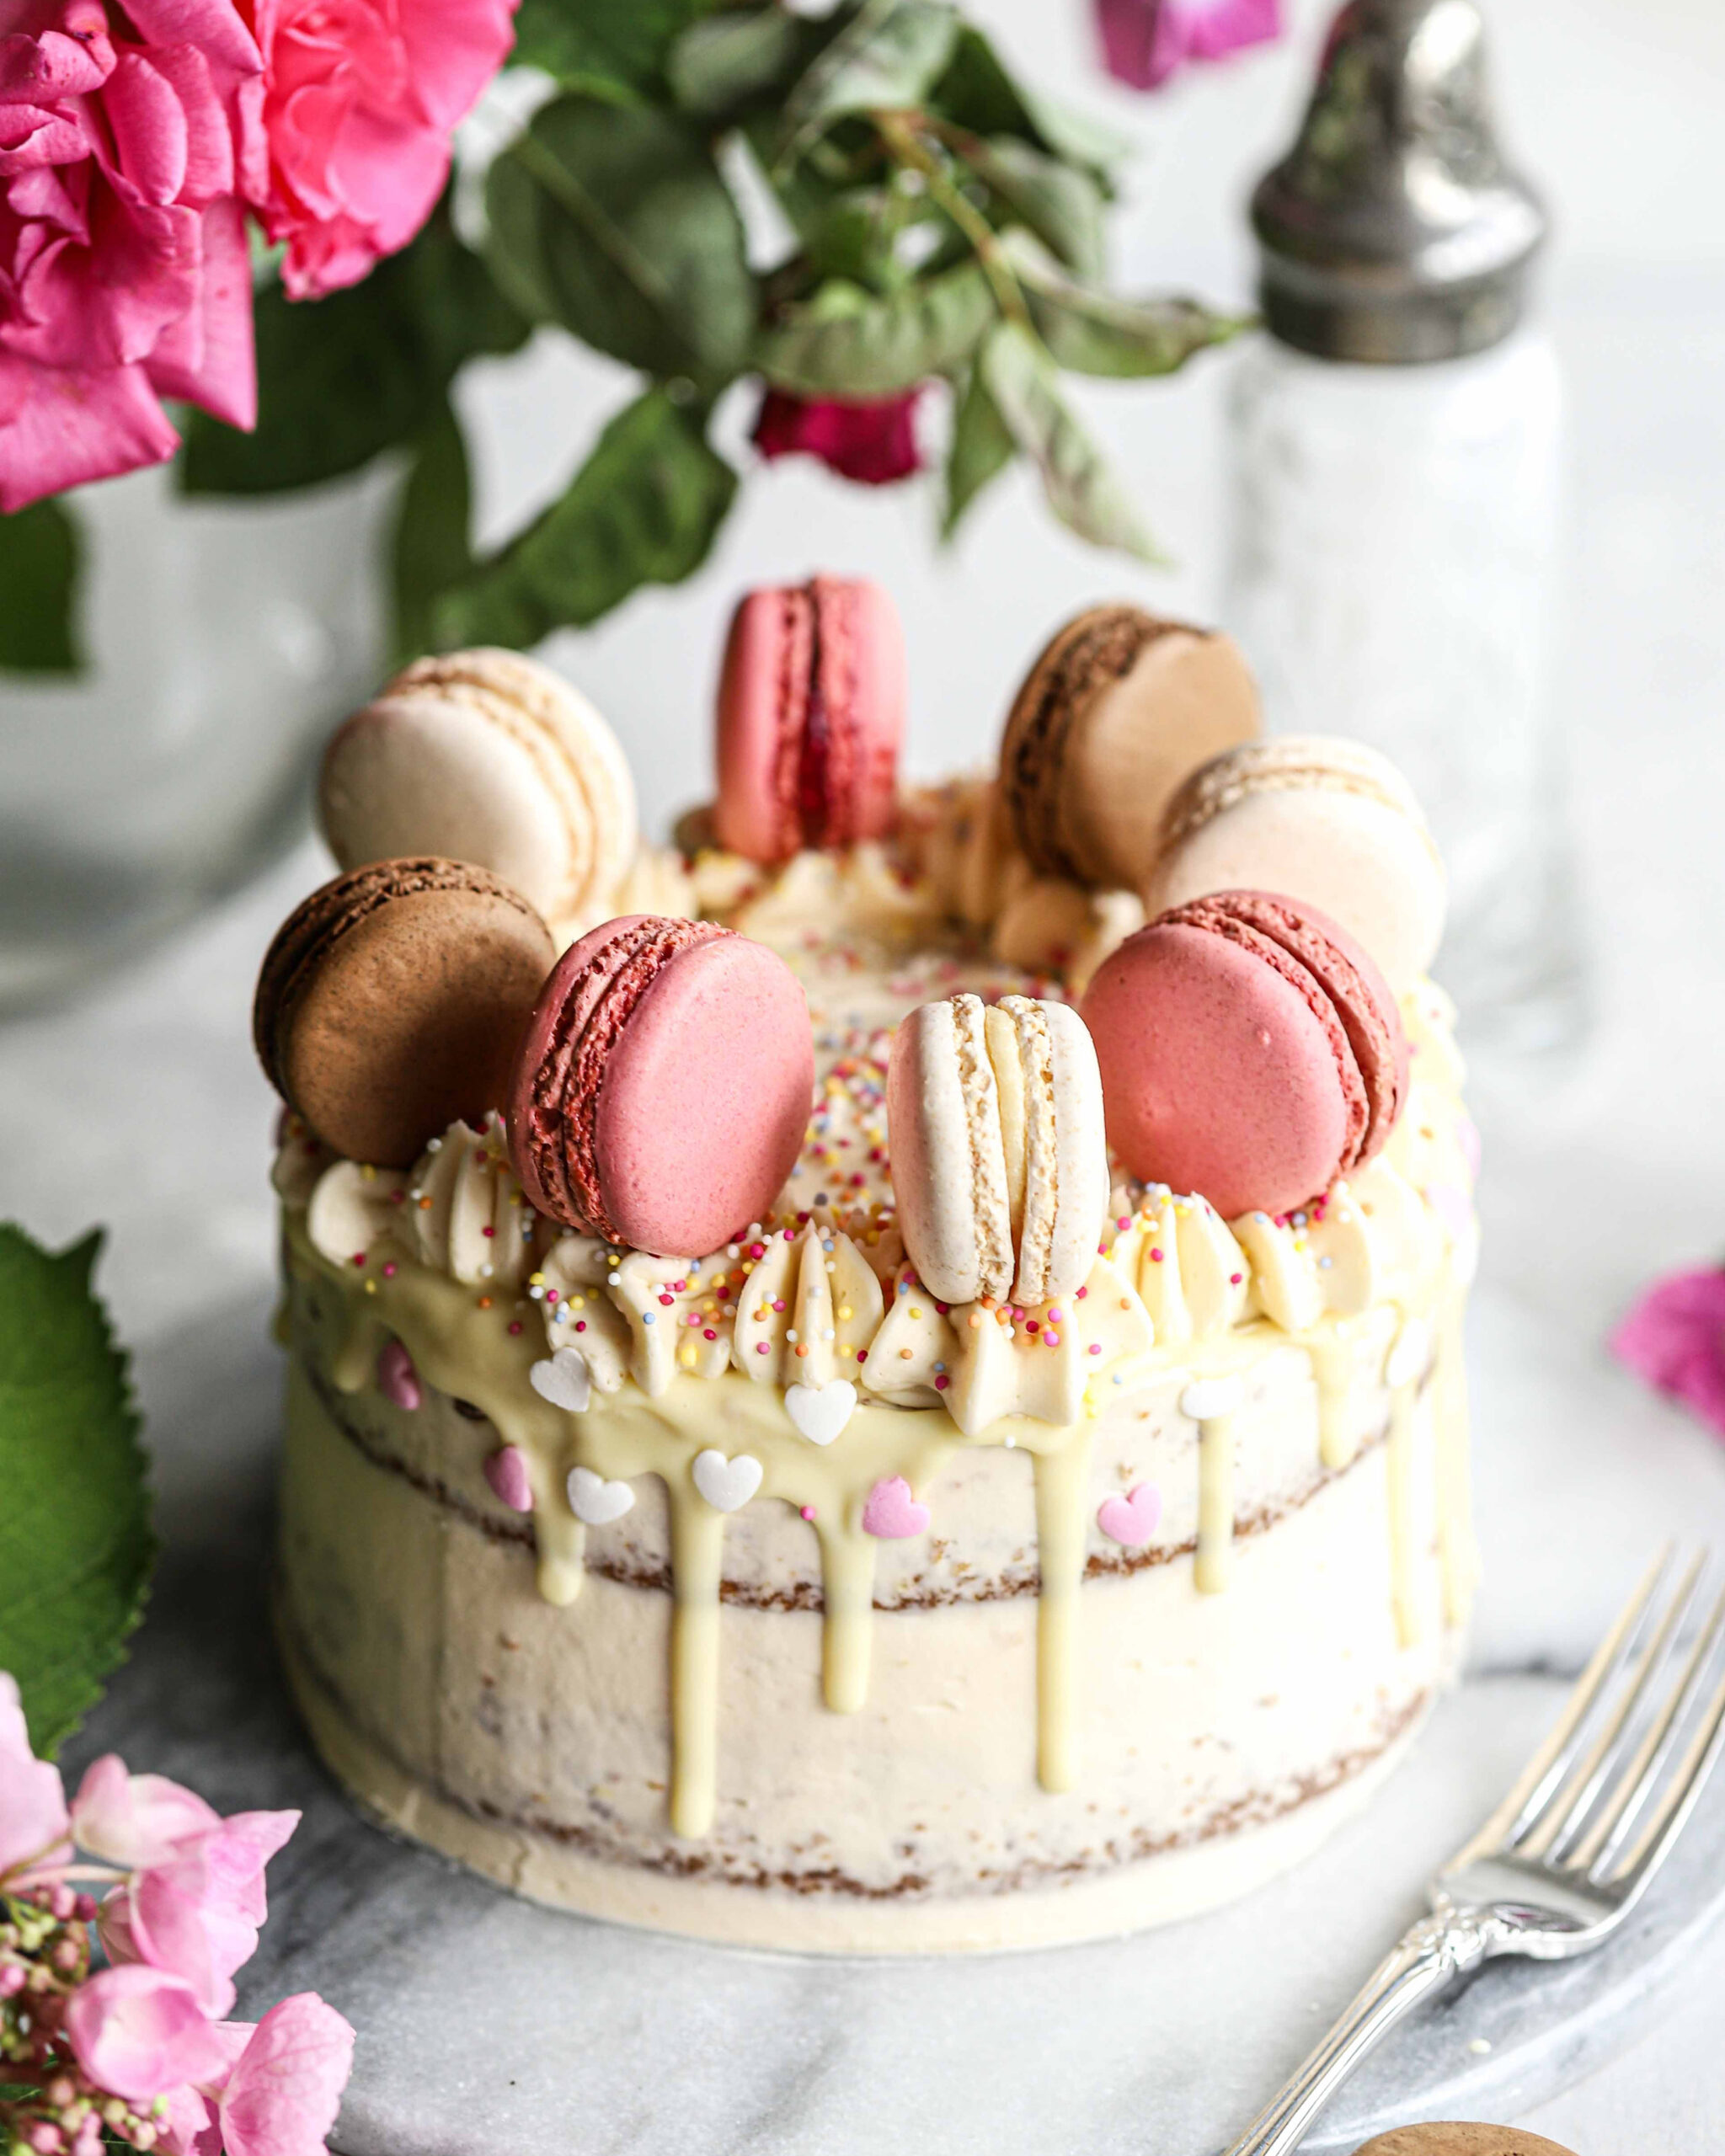 Macaron and Strawberry Cake – 6 inches | 7Marvels Cakes & Macarons